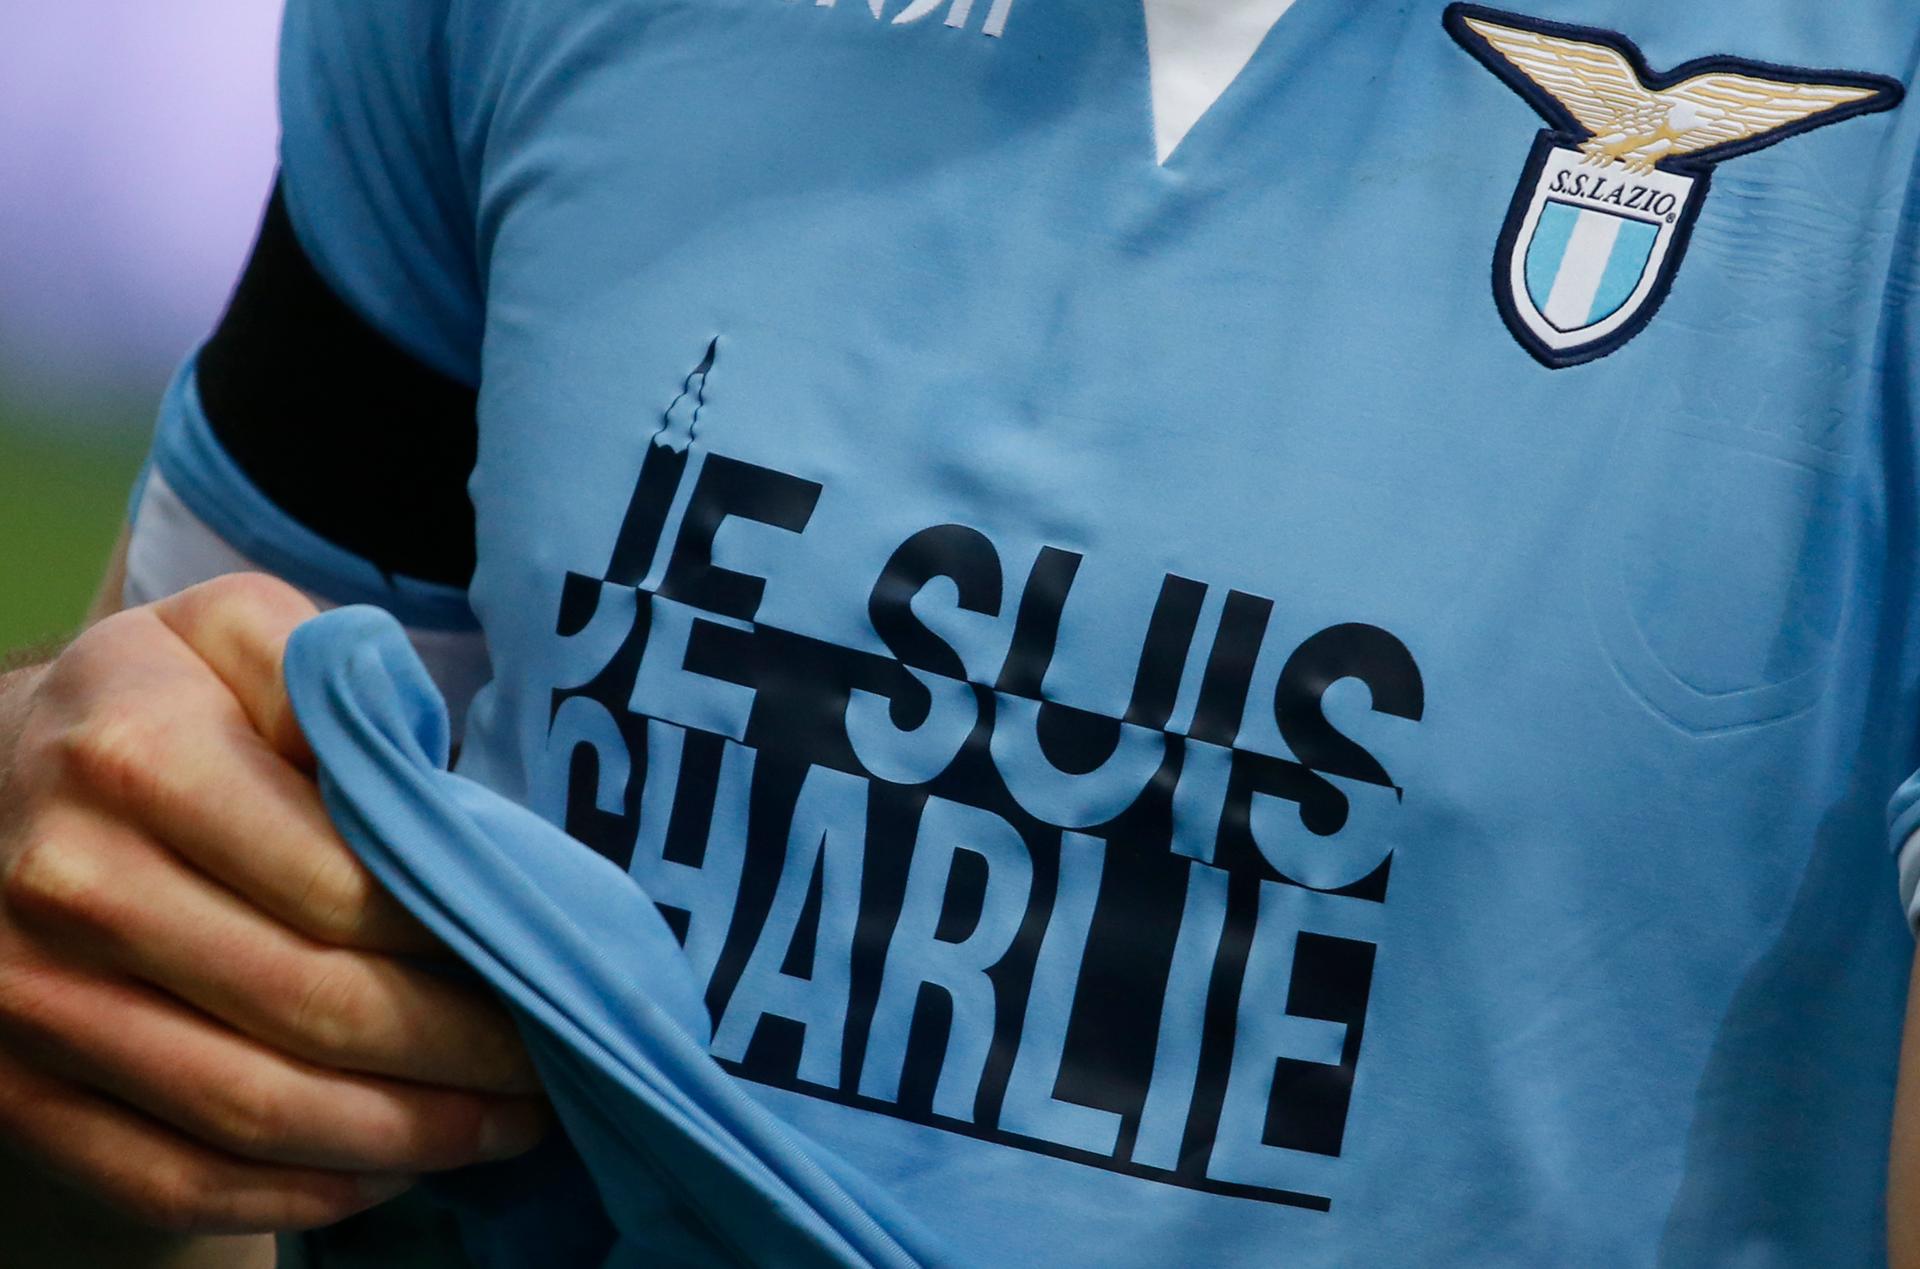 Stefan De Vrij wears a jersey in support of the French satirists during a soccer match in Rome.